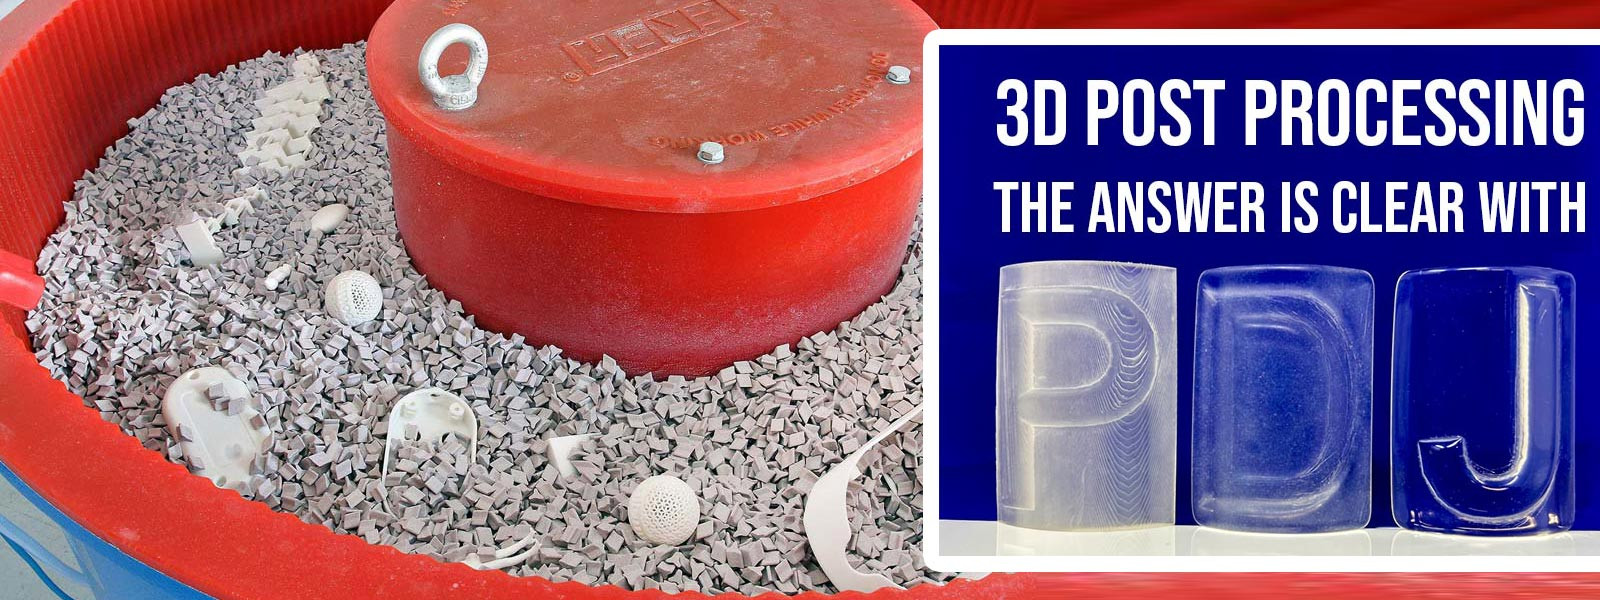 Guidelines for using vibratory bowls to finish 3D...